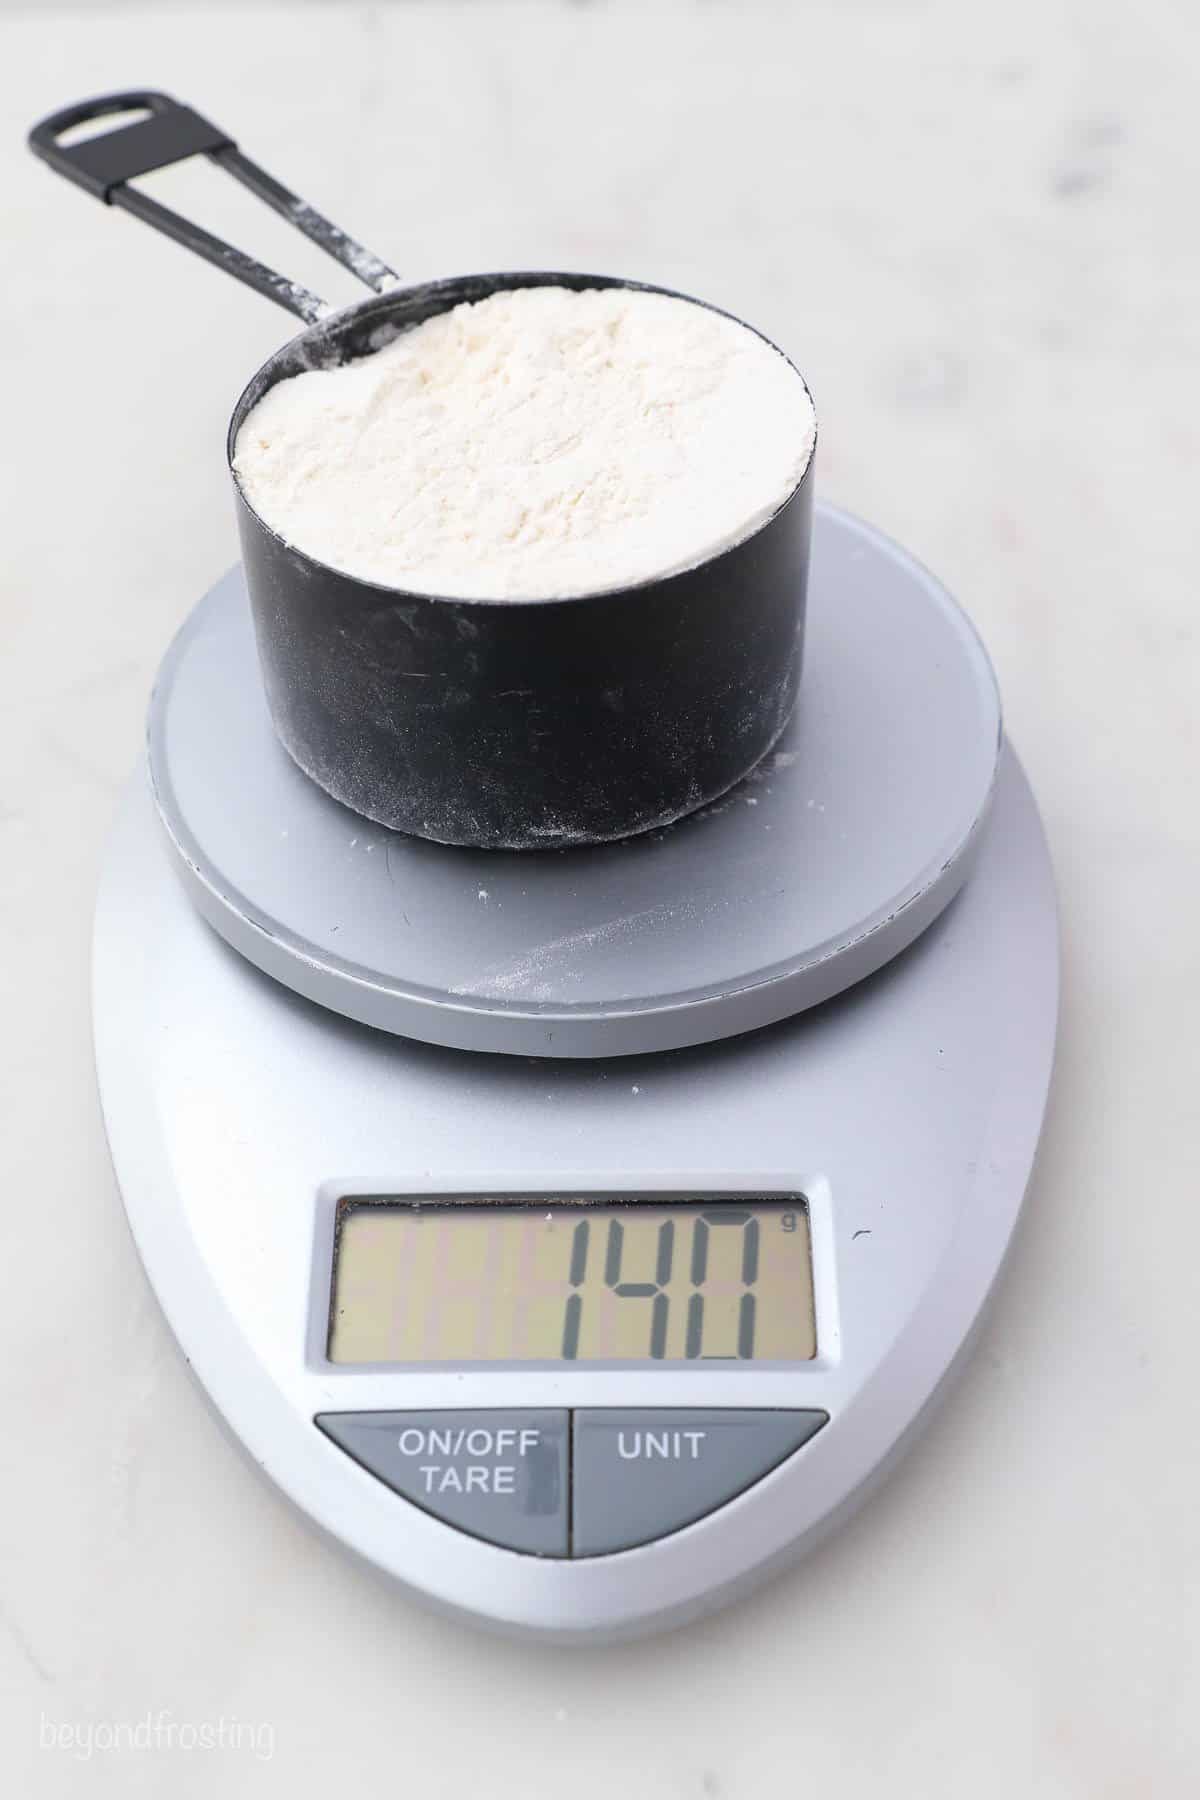 A cup of flour on a kitchen scale weighing 140 grams